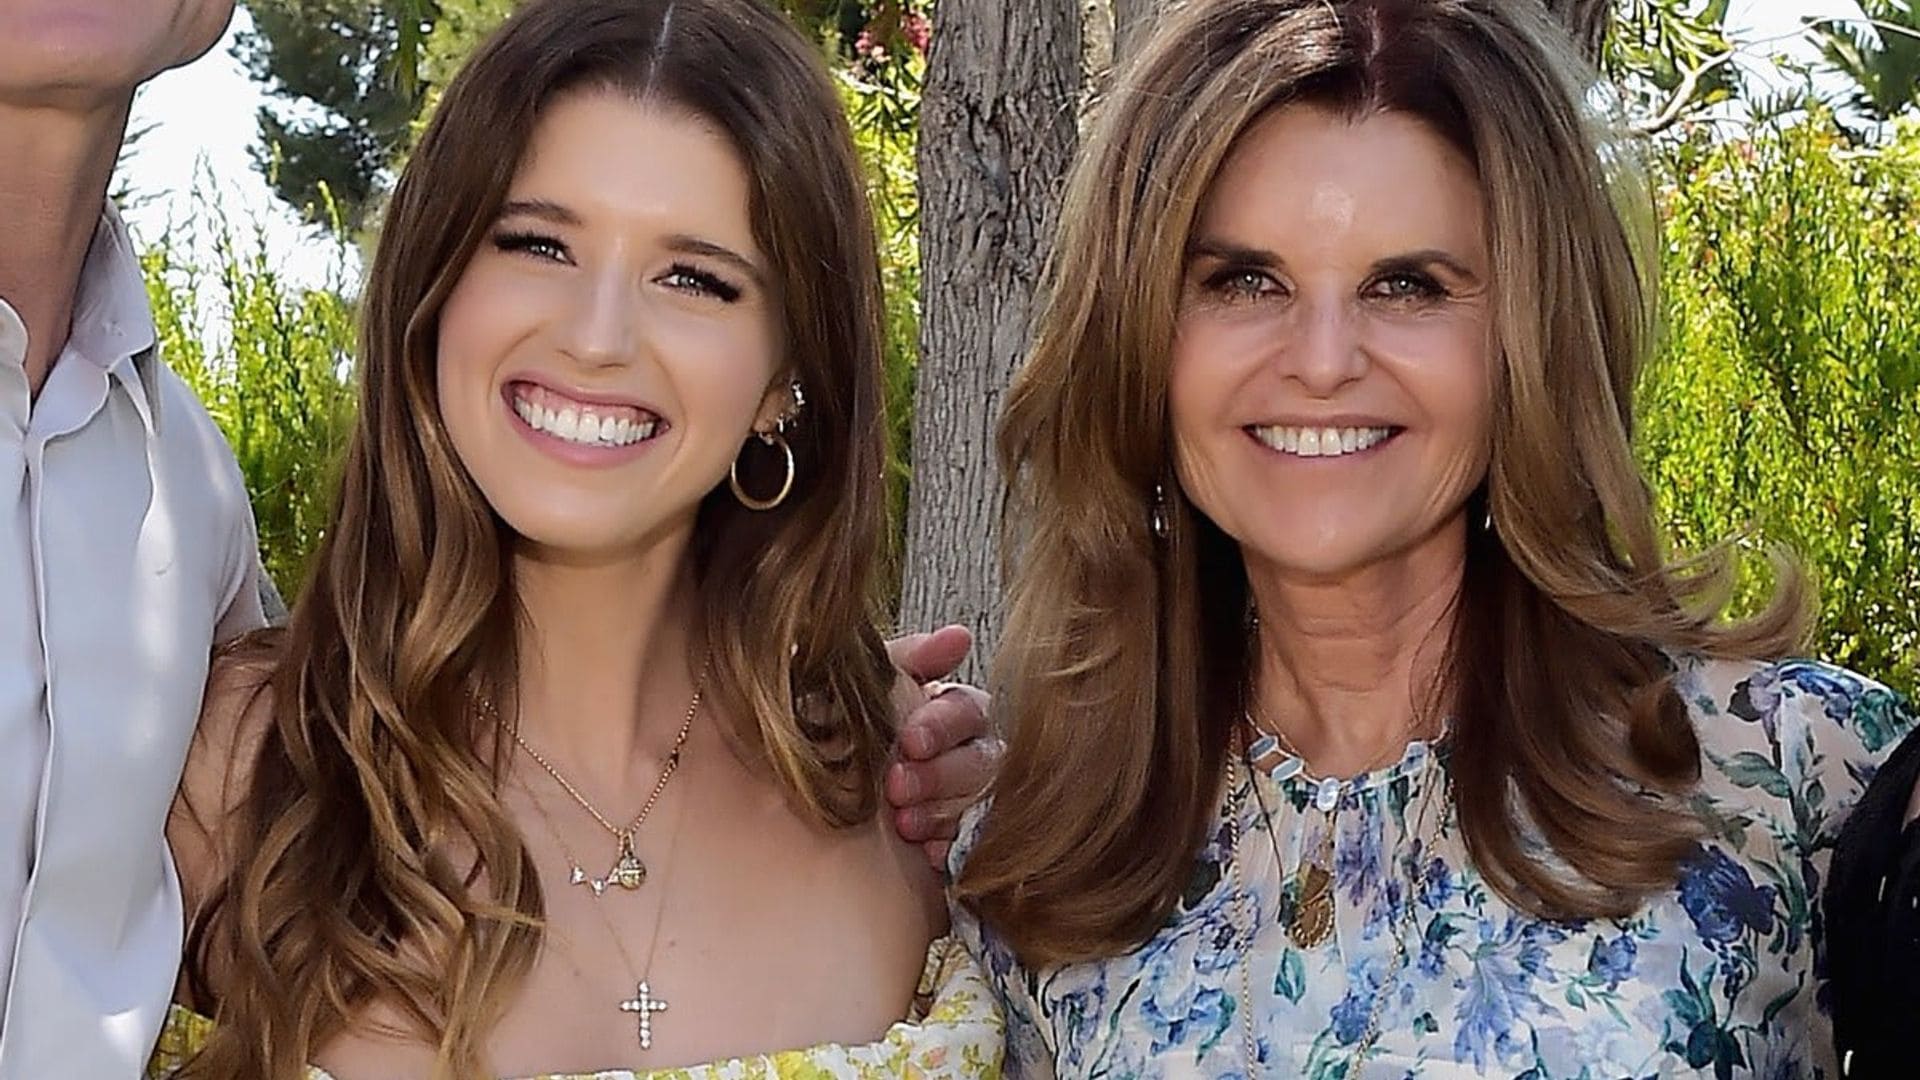 Maria Shriver is 'in awe at what a beautiful mother' daughter Katherine Schwarzenegger is